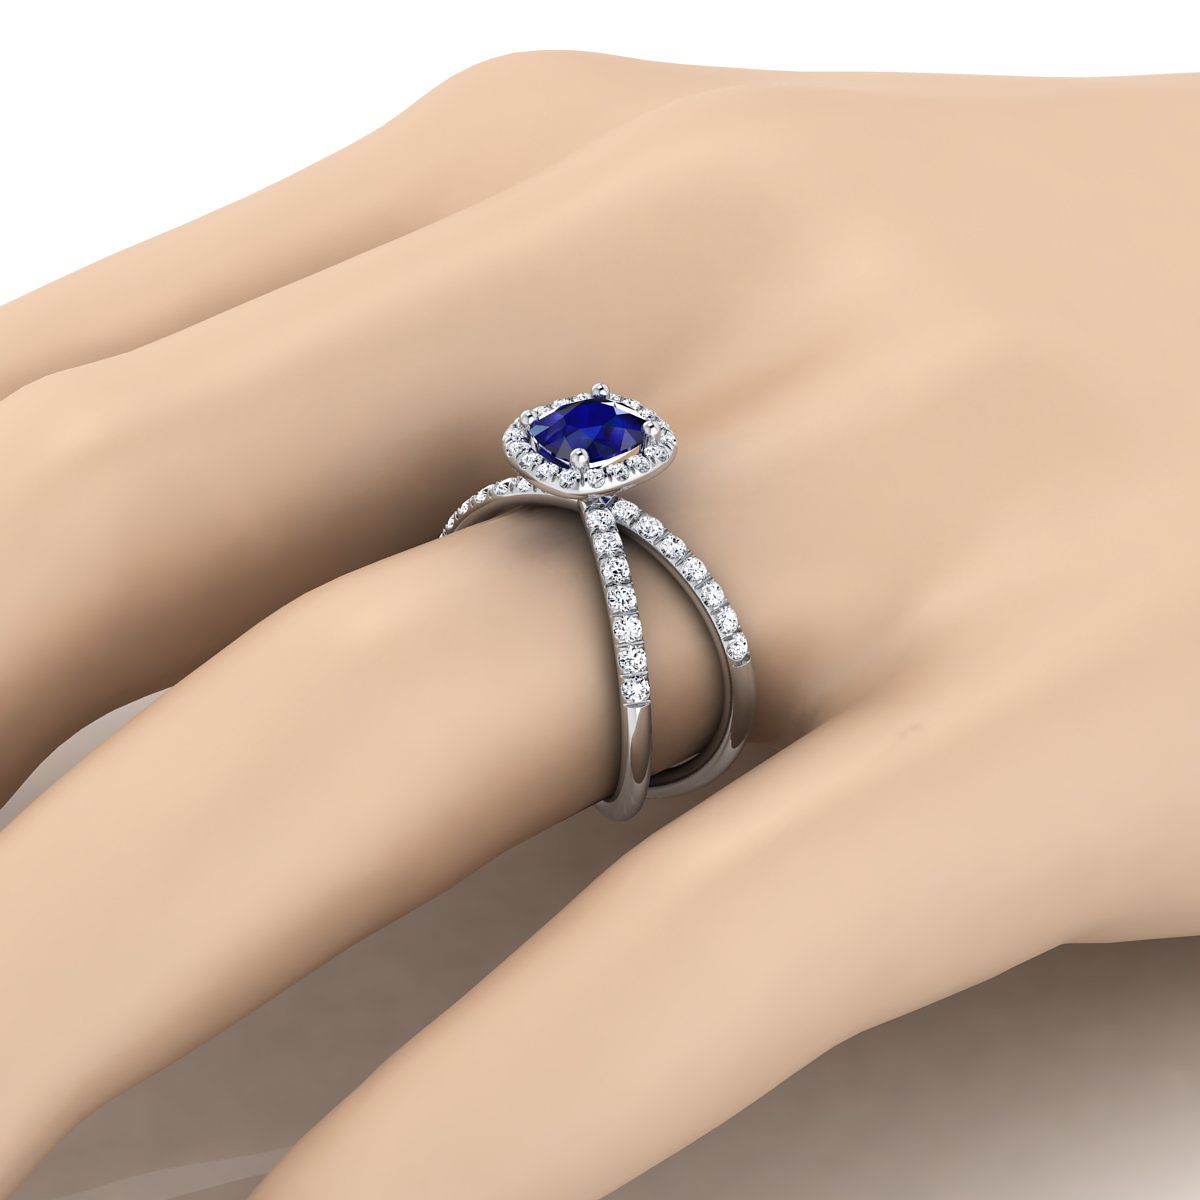 14K White Gold Cushion Sapphire Open Criss Cross French Pave Diamond Engagement Ring -1/2ctw